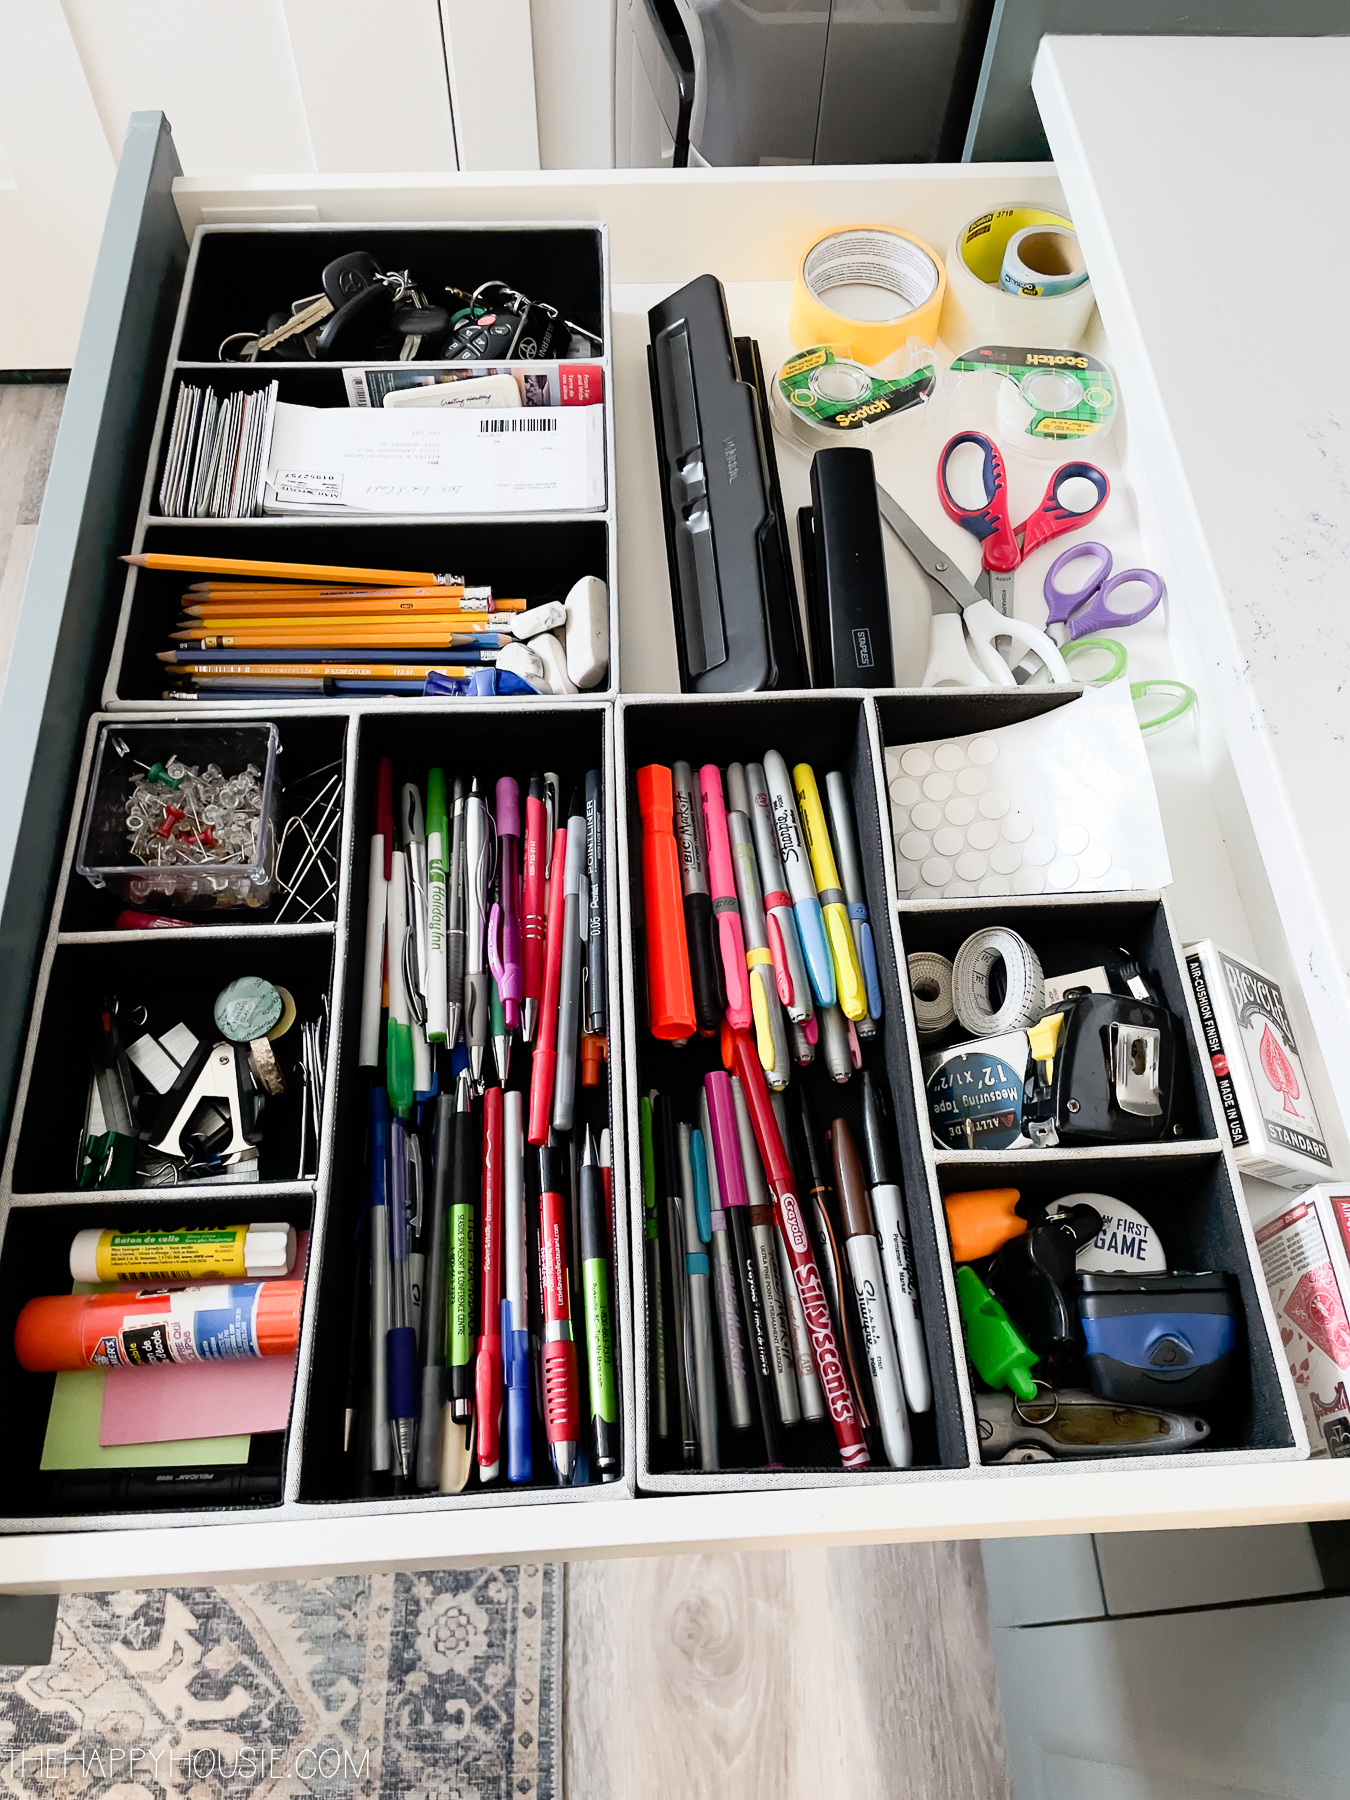 The office drawer open with pens, thumb tacks, scissors and tape.